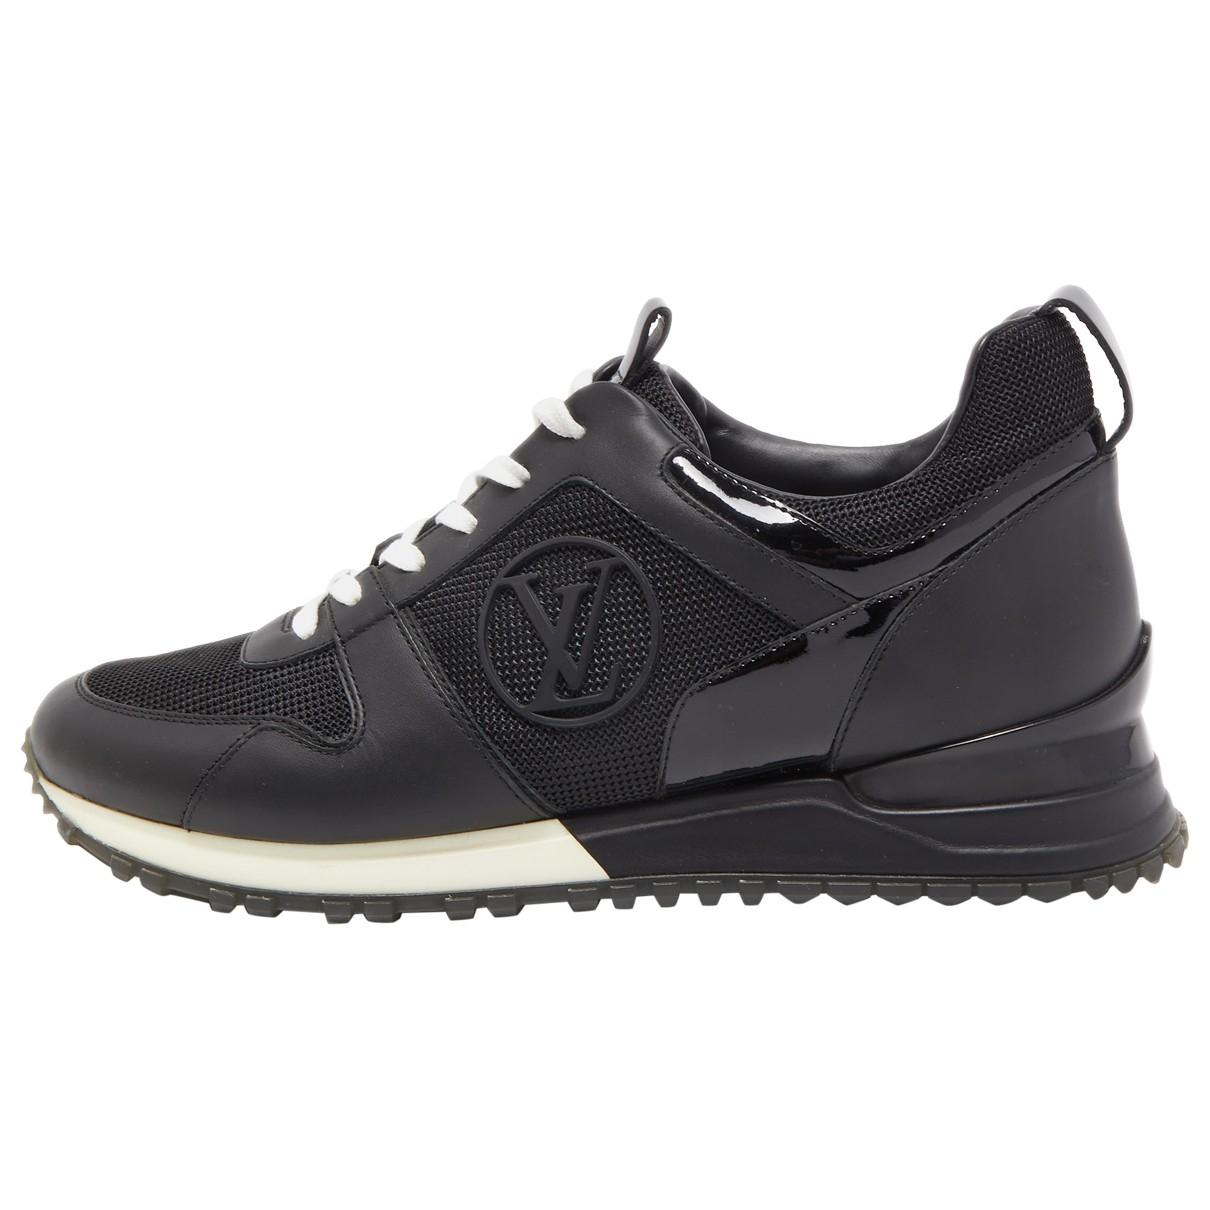 Louis Vuitton - Authenticated Run Away Trainer - Leather Grey Plain for Women, Very Good Condition